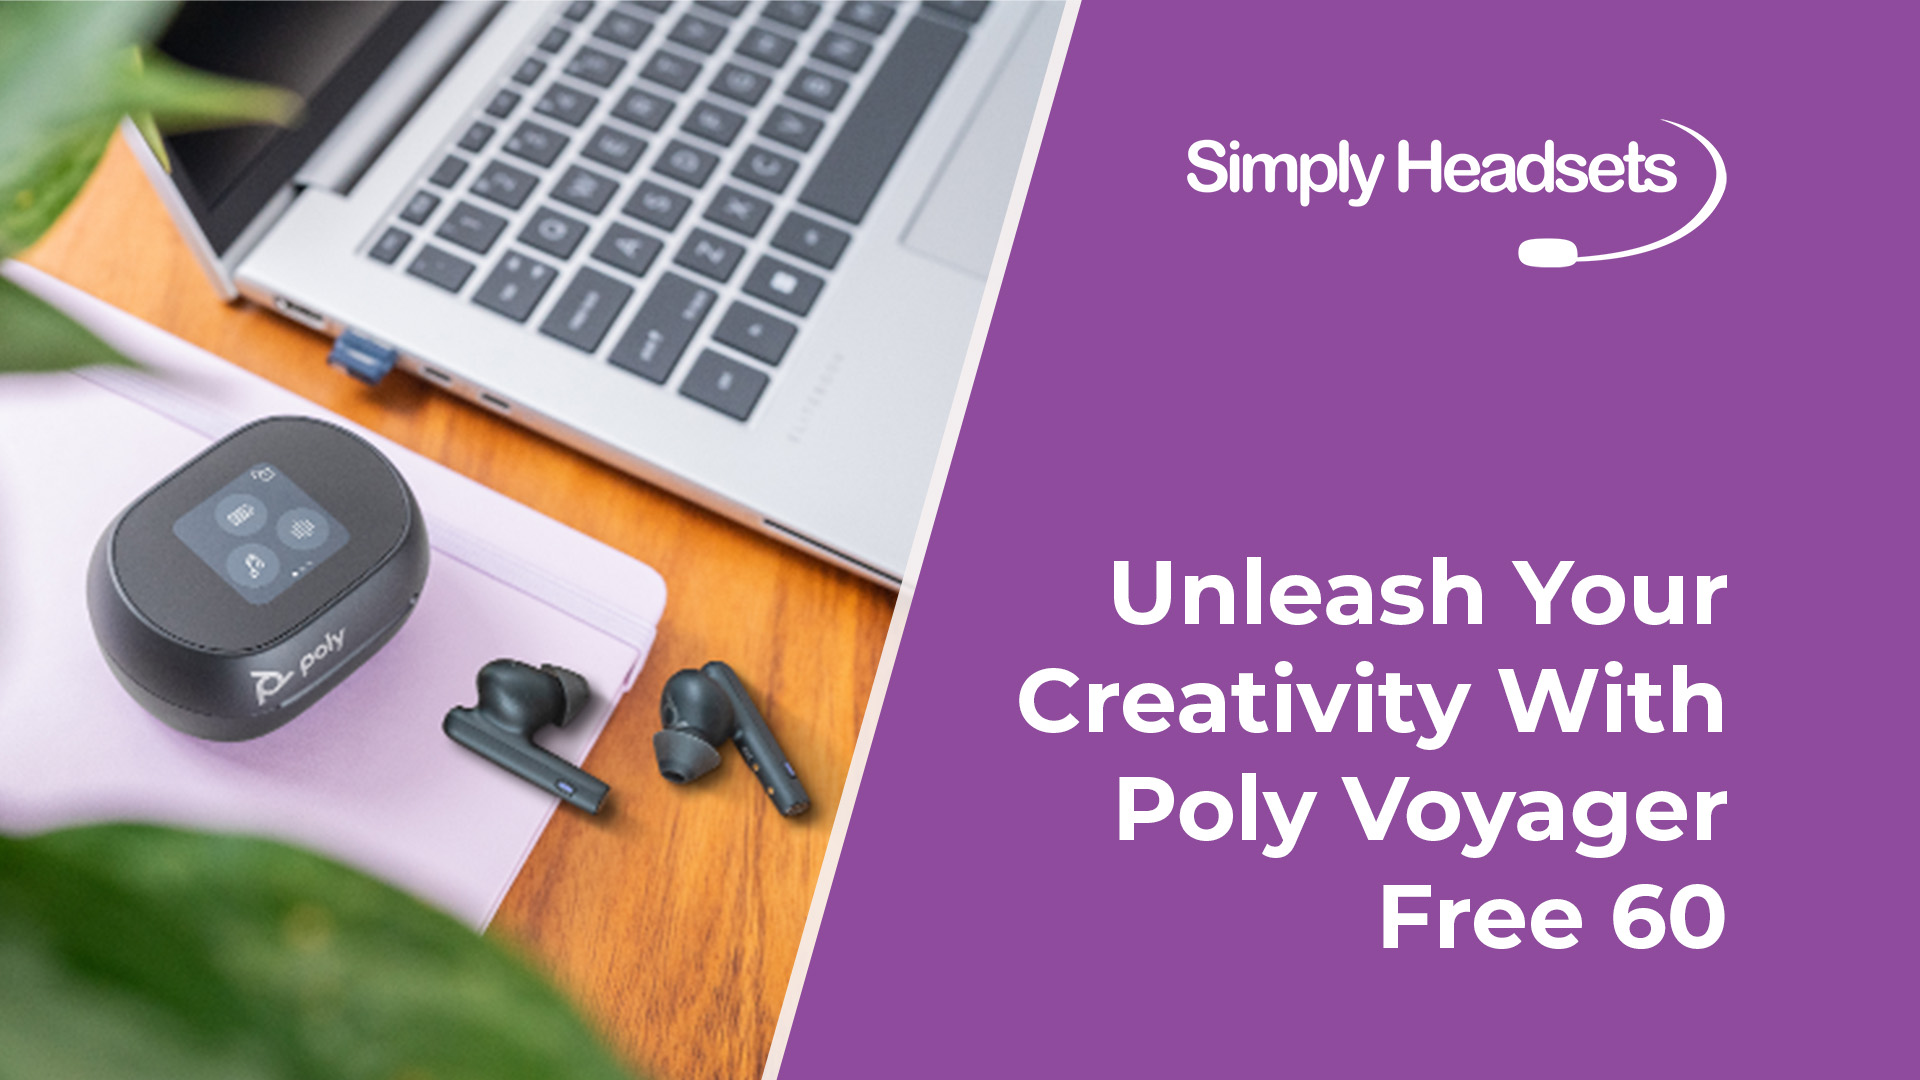 Review | Free Earbuds Poly Simply Voyager 60 Headsets